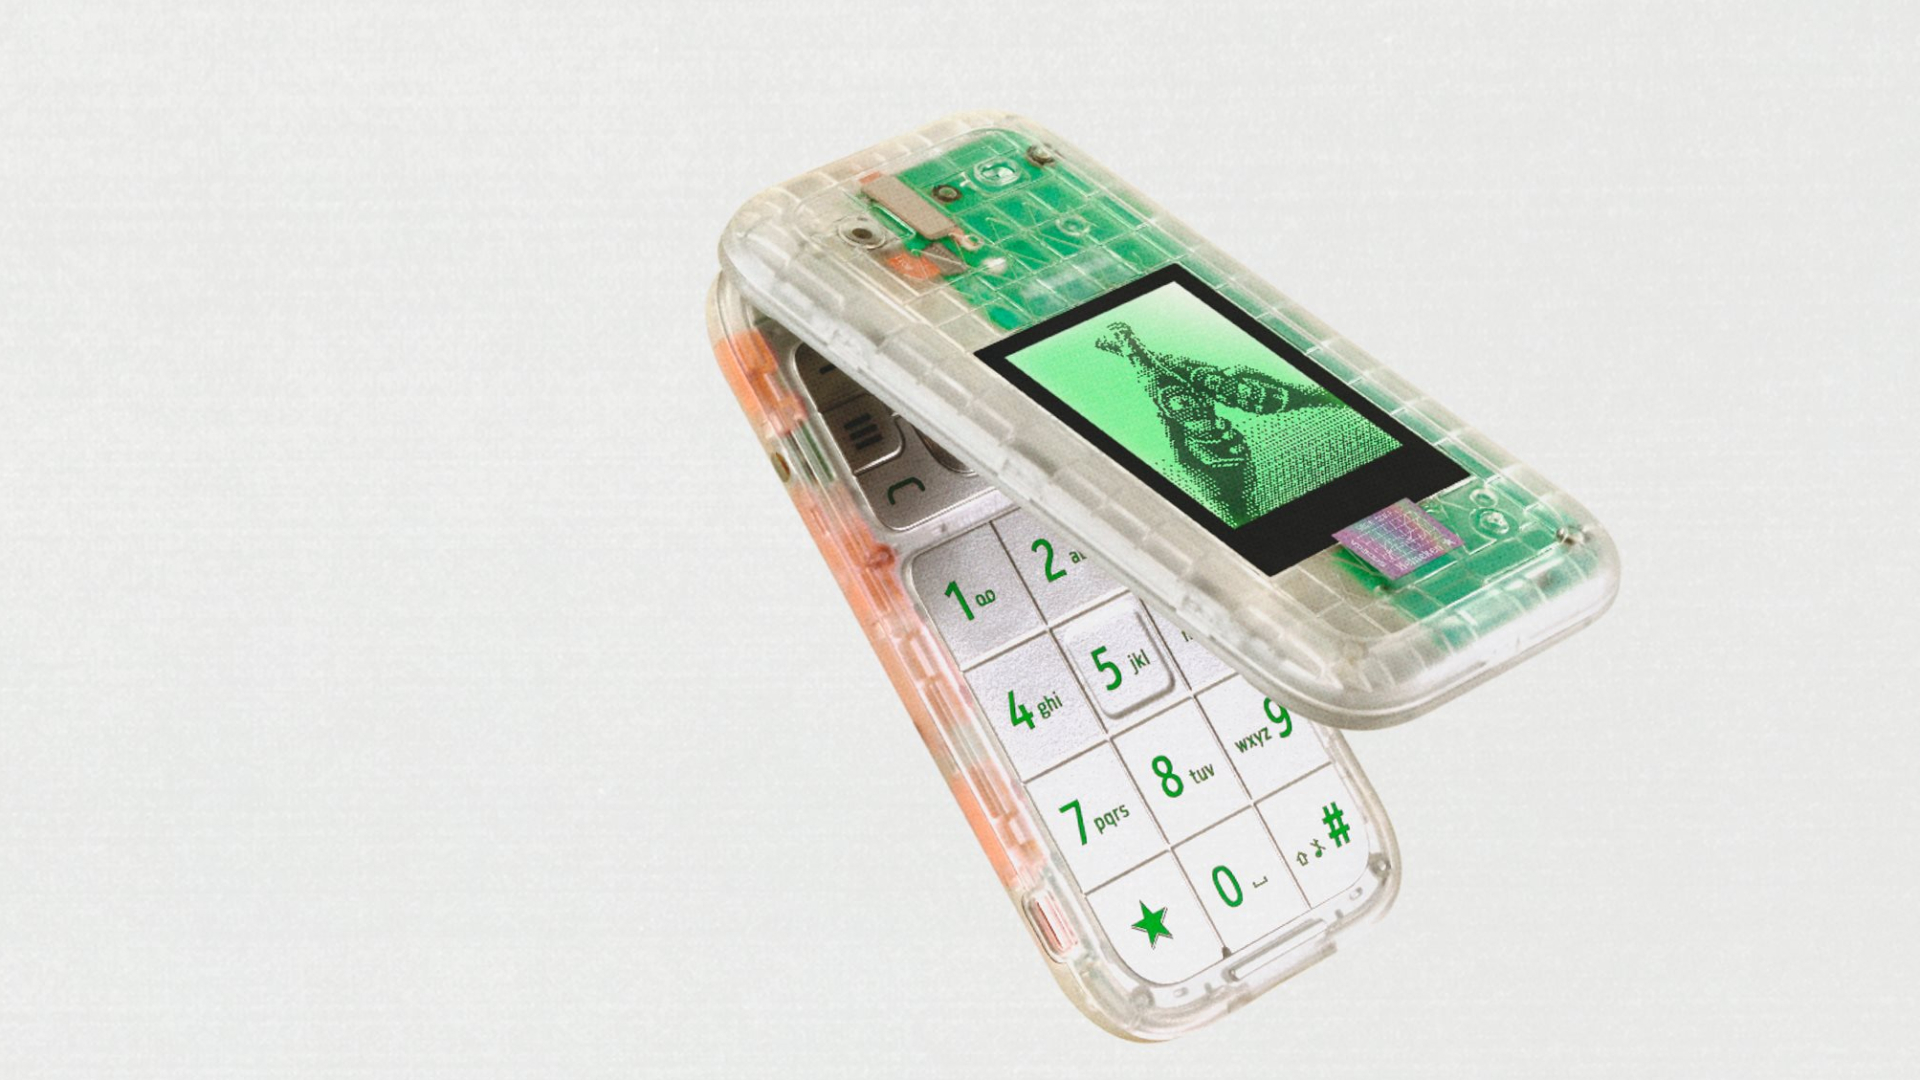 The Boring Phone is a transparent flip phone that takes me back to my childhood